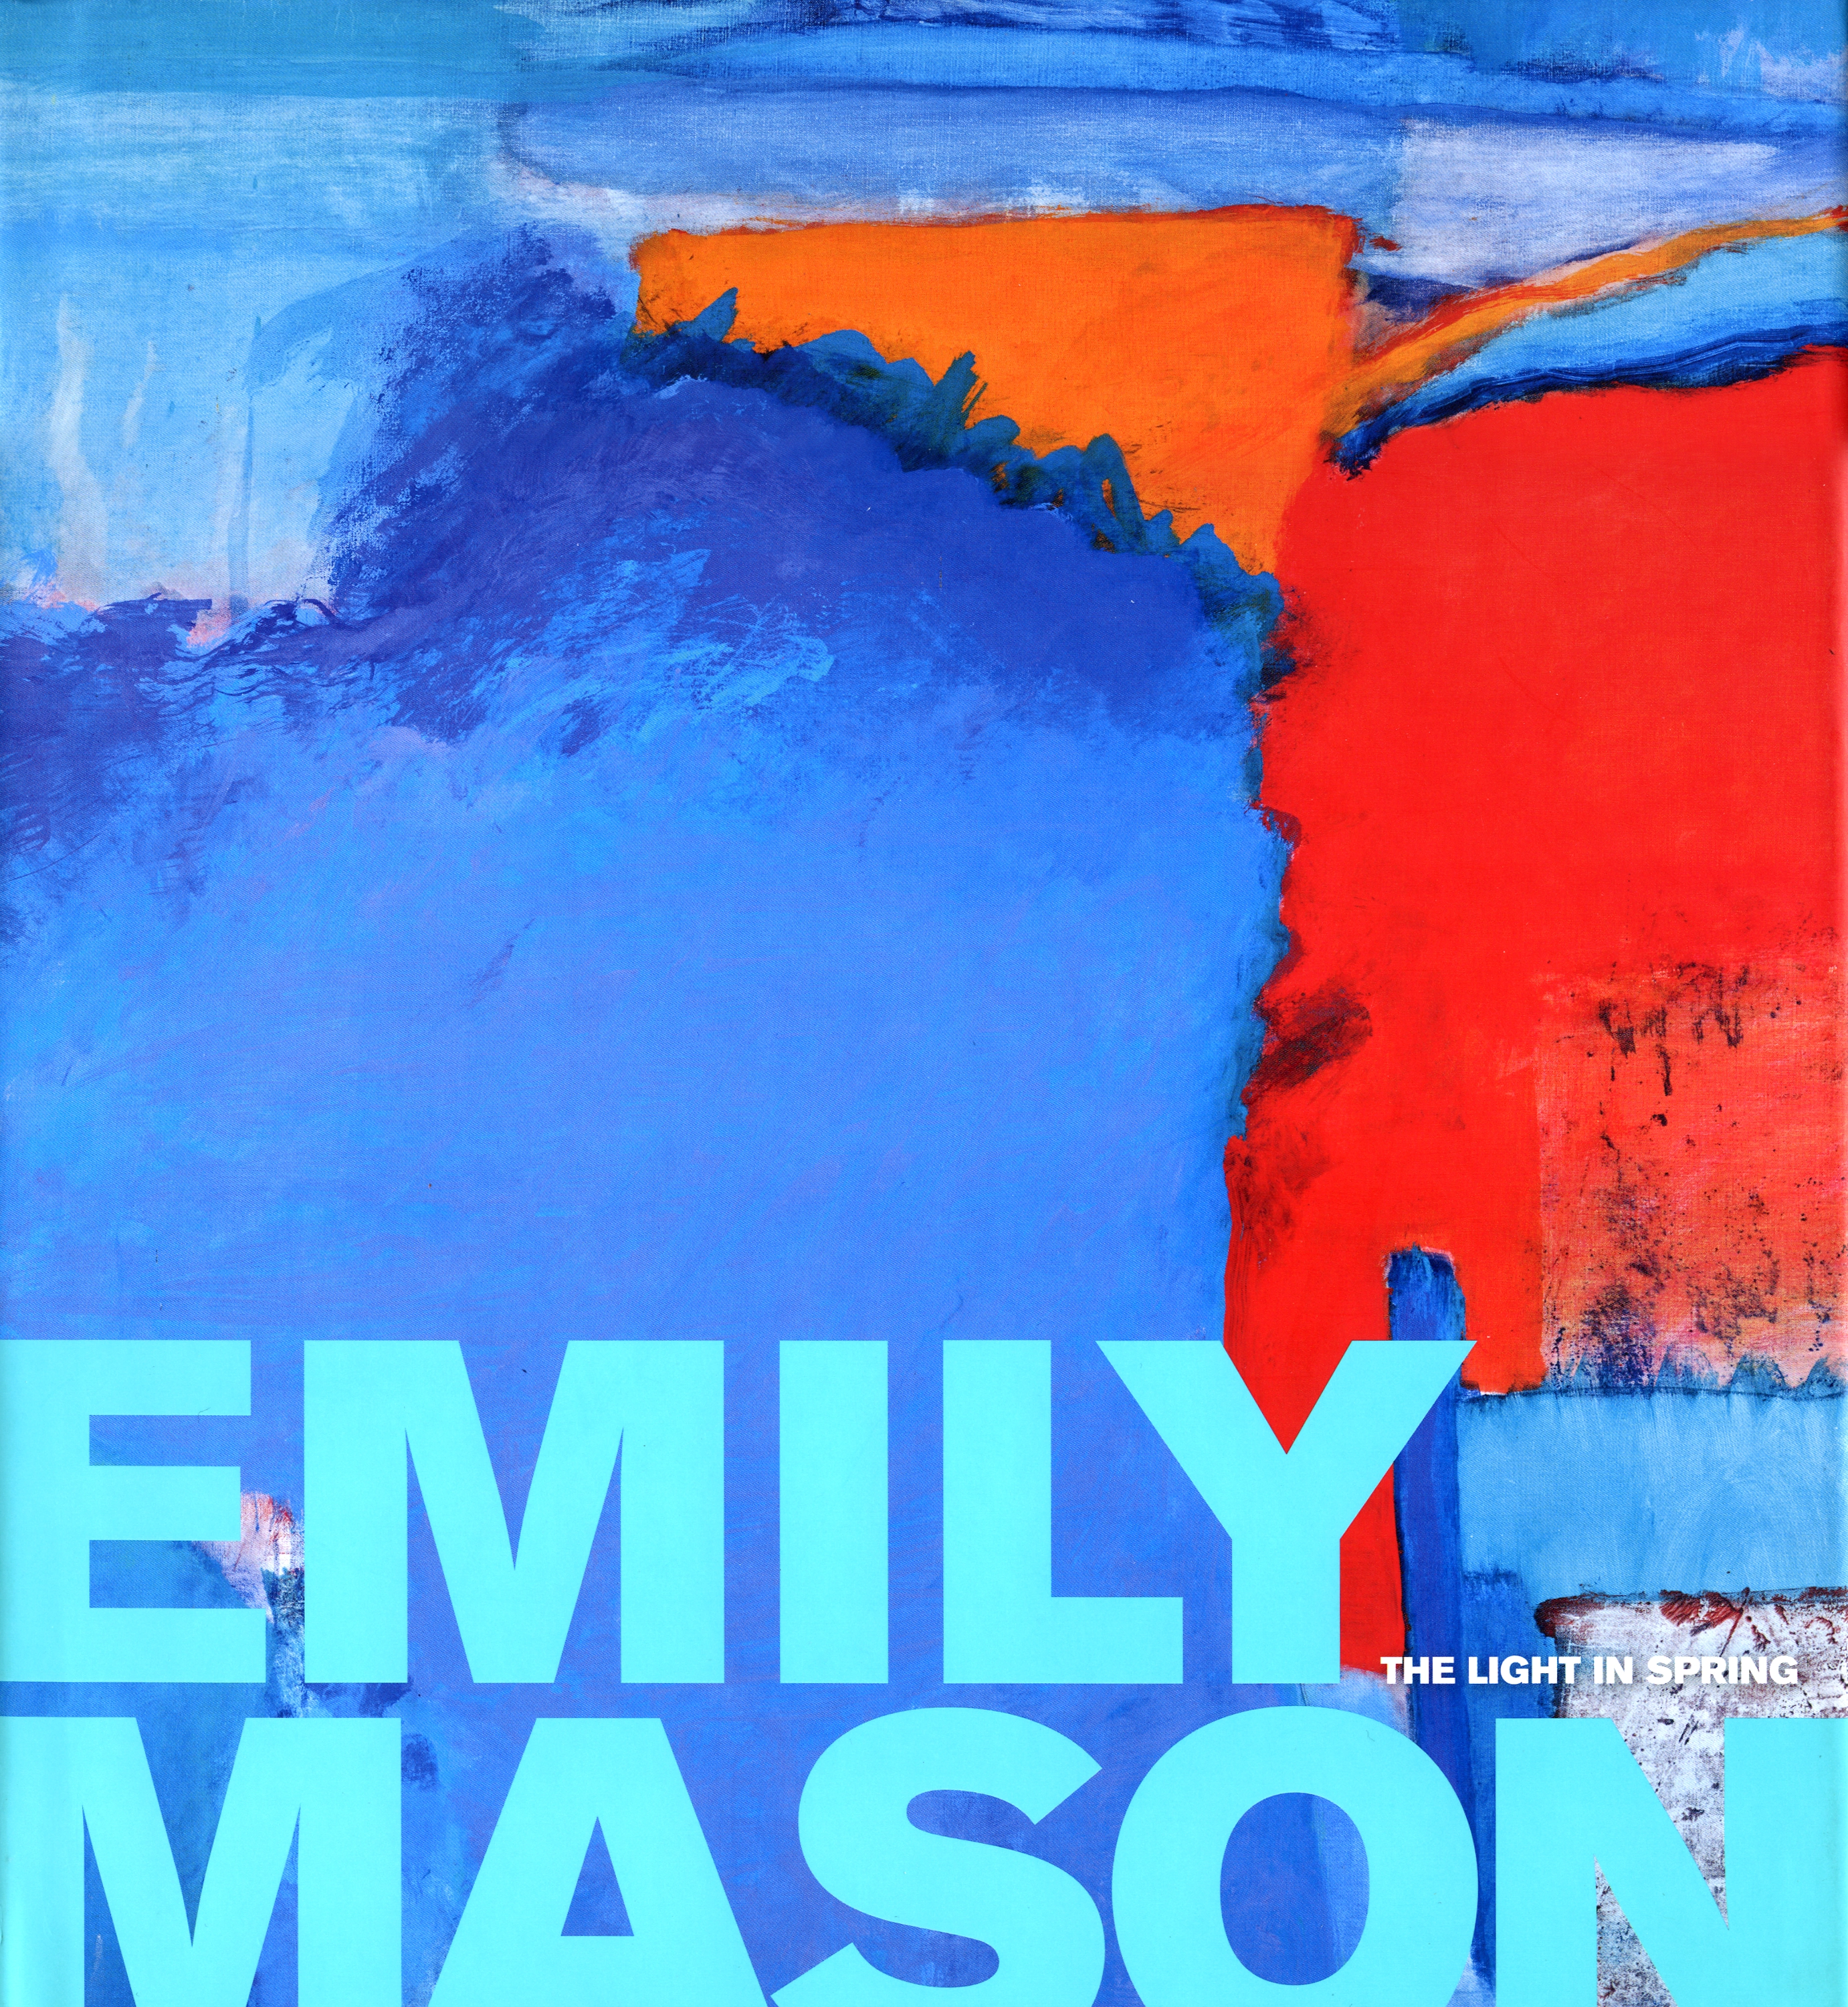 Image of a book cover showing a blue abstract painting with the text "Emily Mason" in light blue and "The Light in Spring" in small, white text at the bottom.